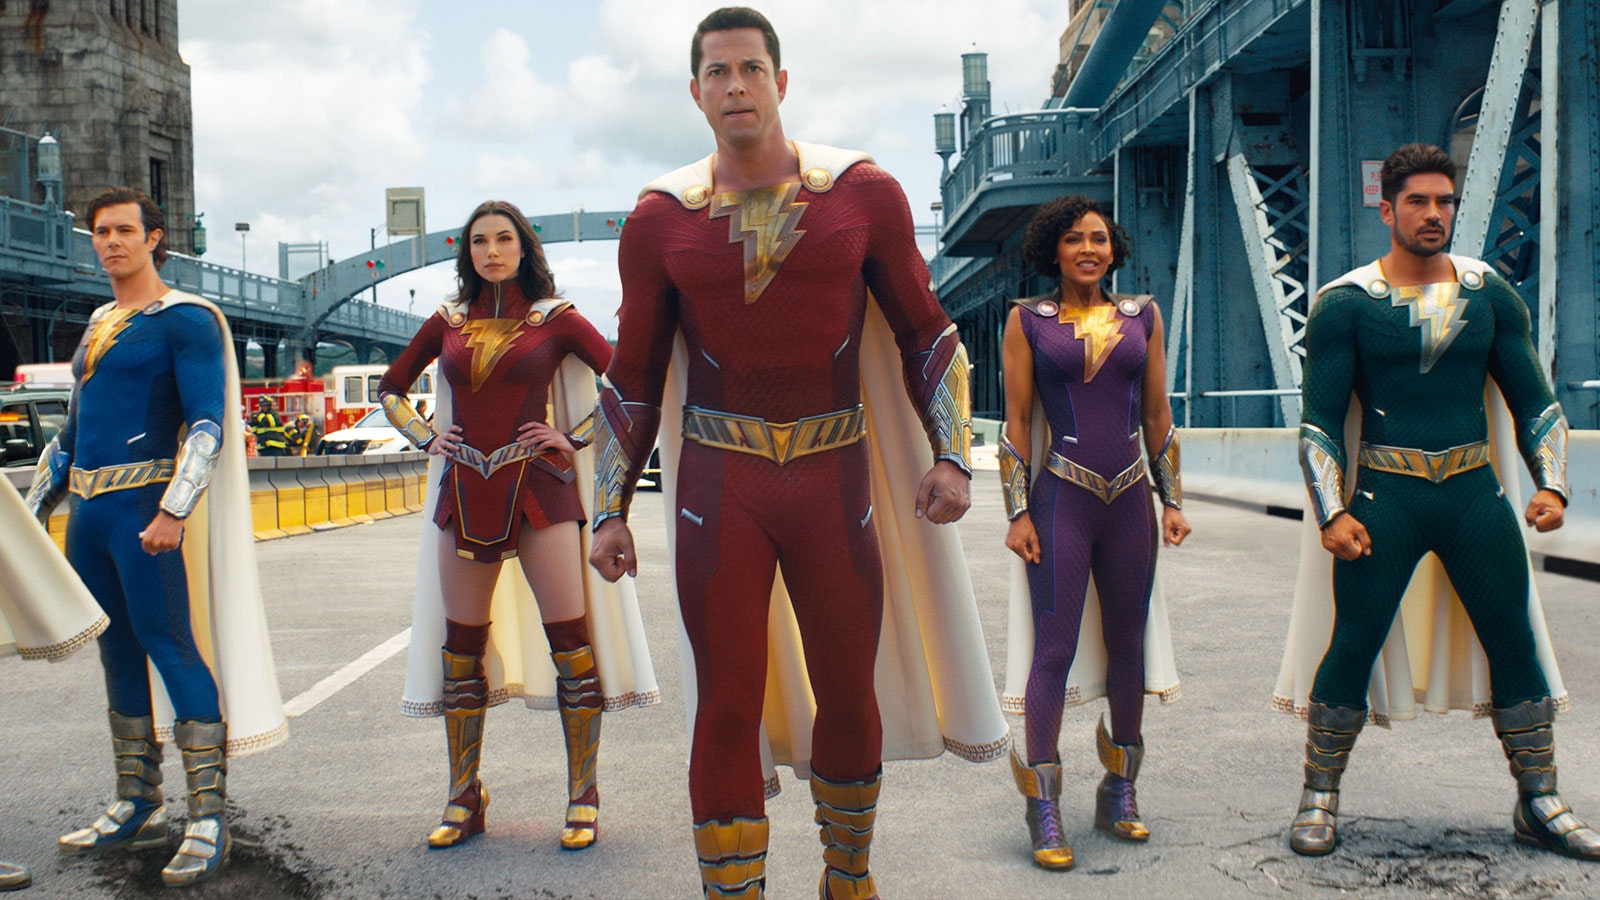 Zachary Levi and cast of Shazam! Fury of the Gods pen their own